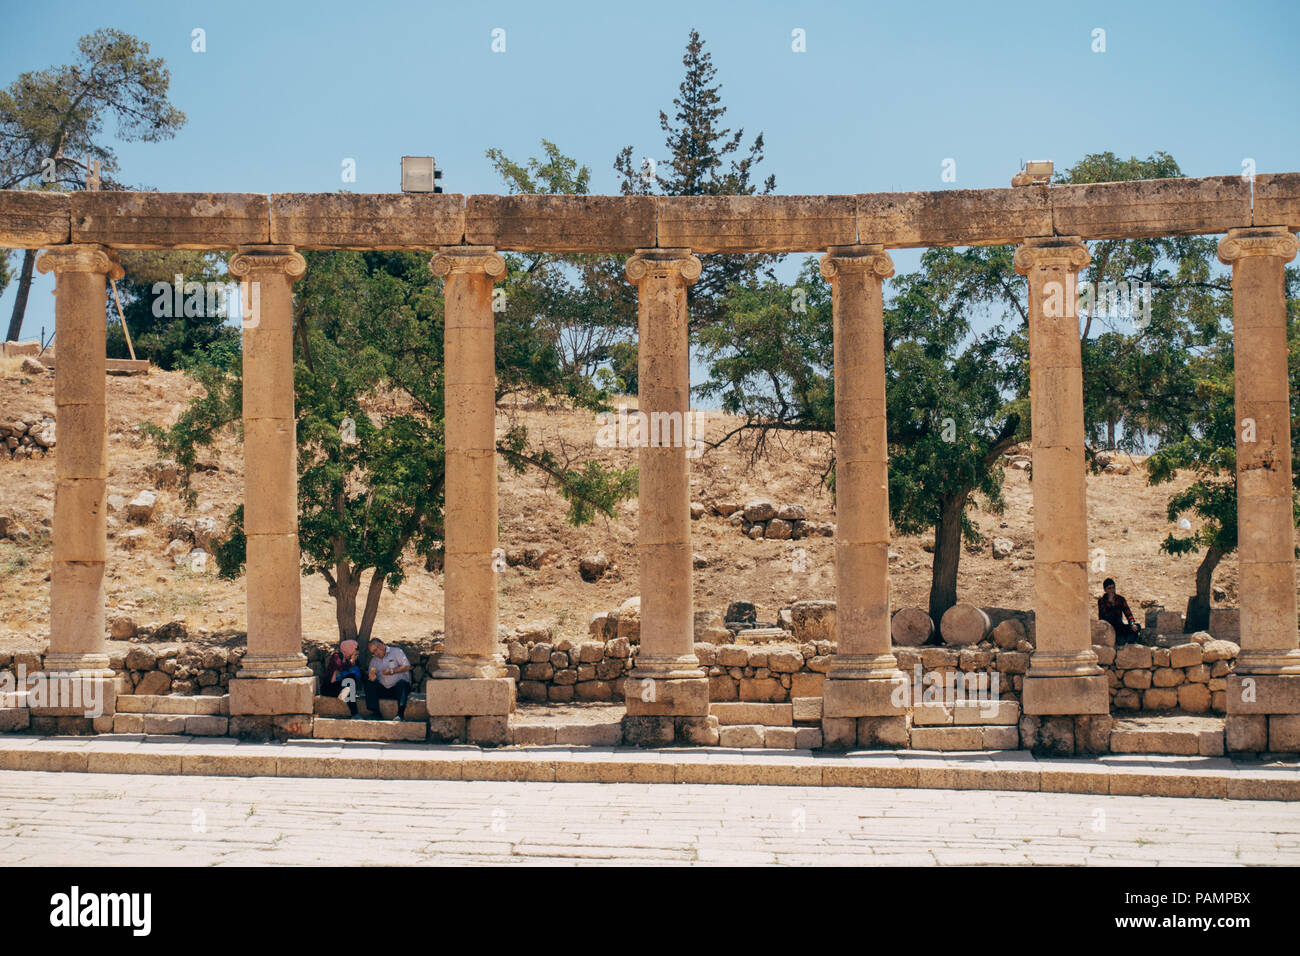 The ruined stones, concrete slabs and pillars in the ancient Mediterranean city of Jerash, Jordan Stock Photo